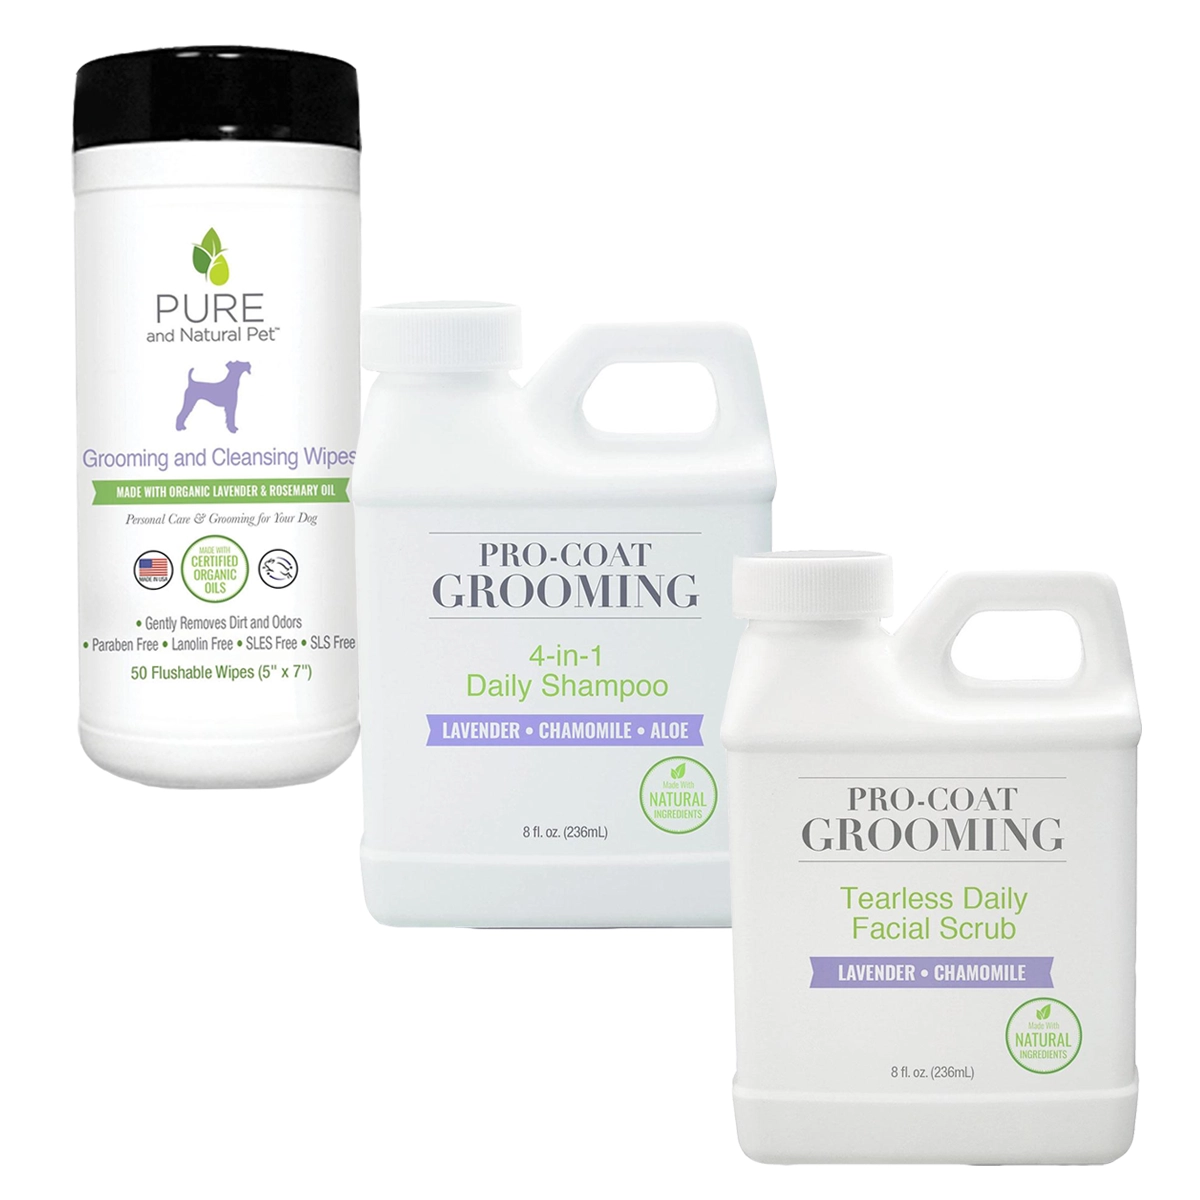 Grooming Bundle - Lavender Shampoo with Wipes and Facial Scrub